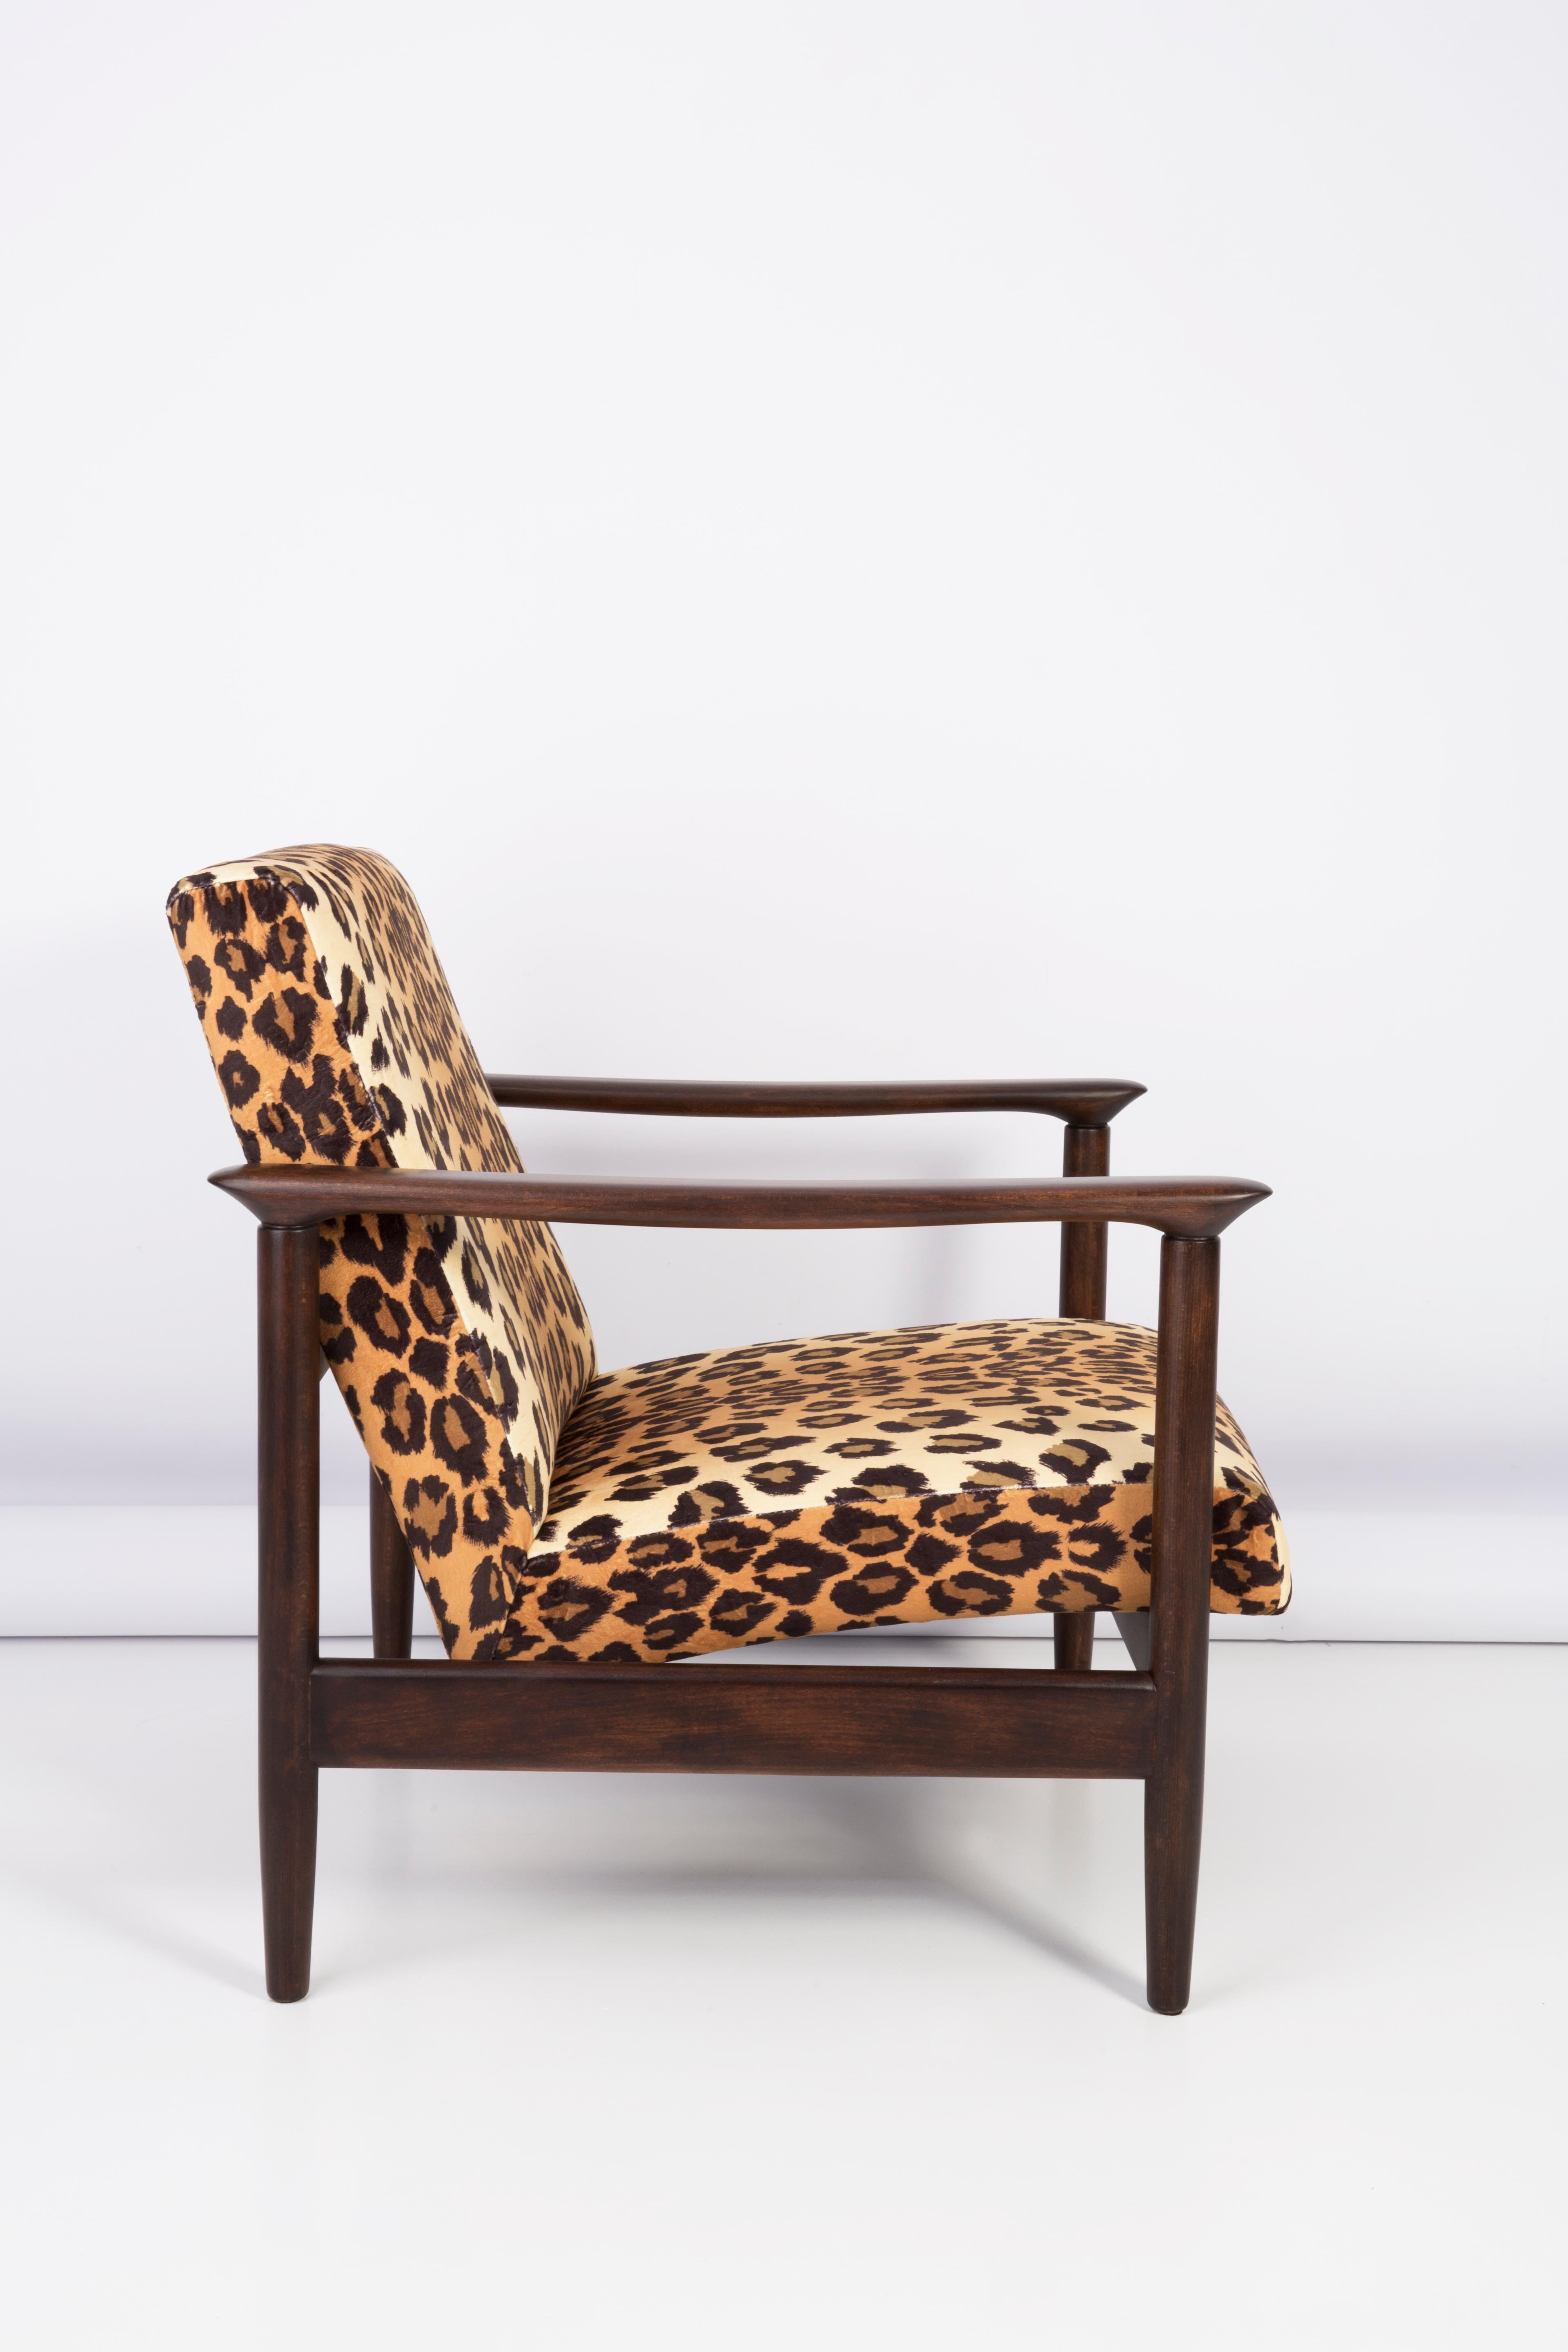 Beautiful Leopard Armchair GFM-142, designed by Edmund Homa, a polish architect, designer of Industrial Design and interior architecture, professor at the Academy of Fine Arts in Gdansk.

The armchair was made in the 1960s in the Gosciecinska